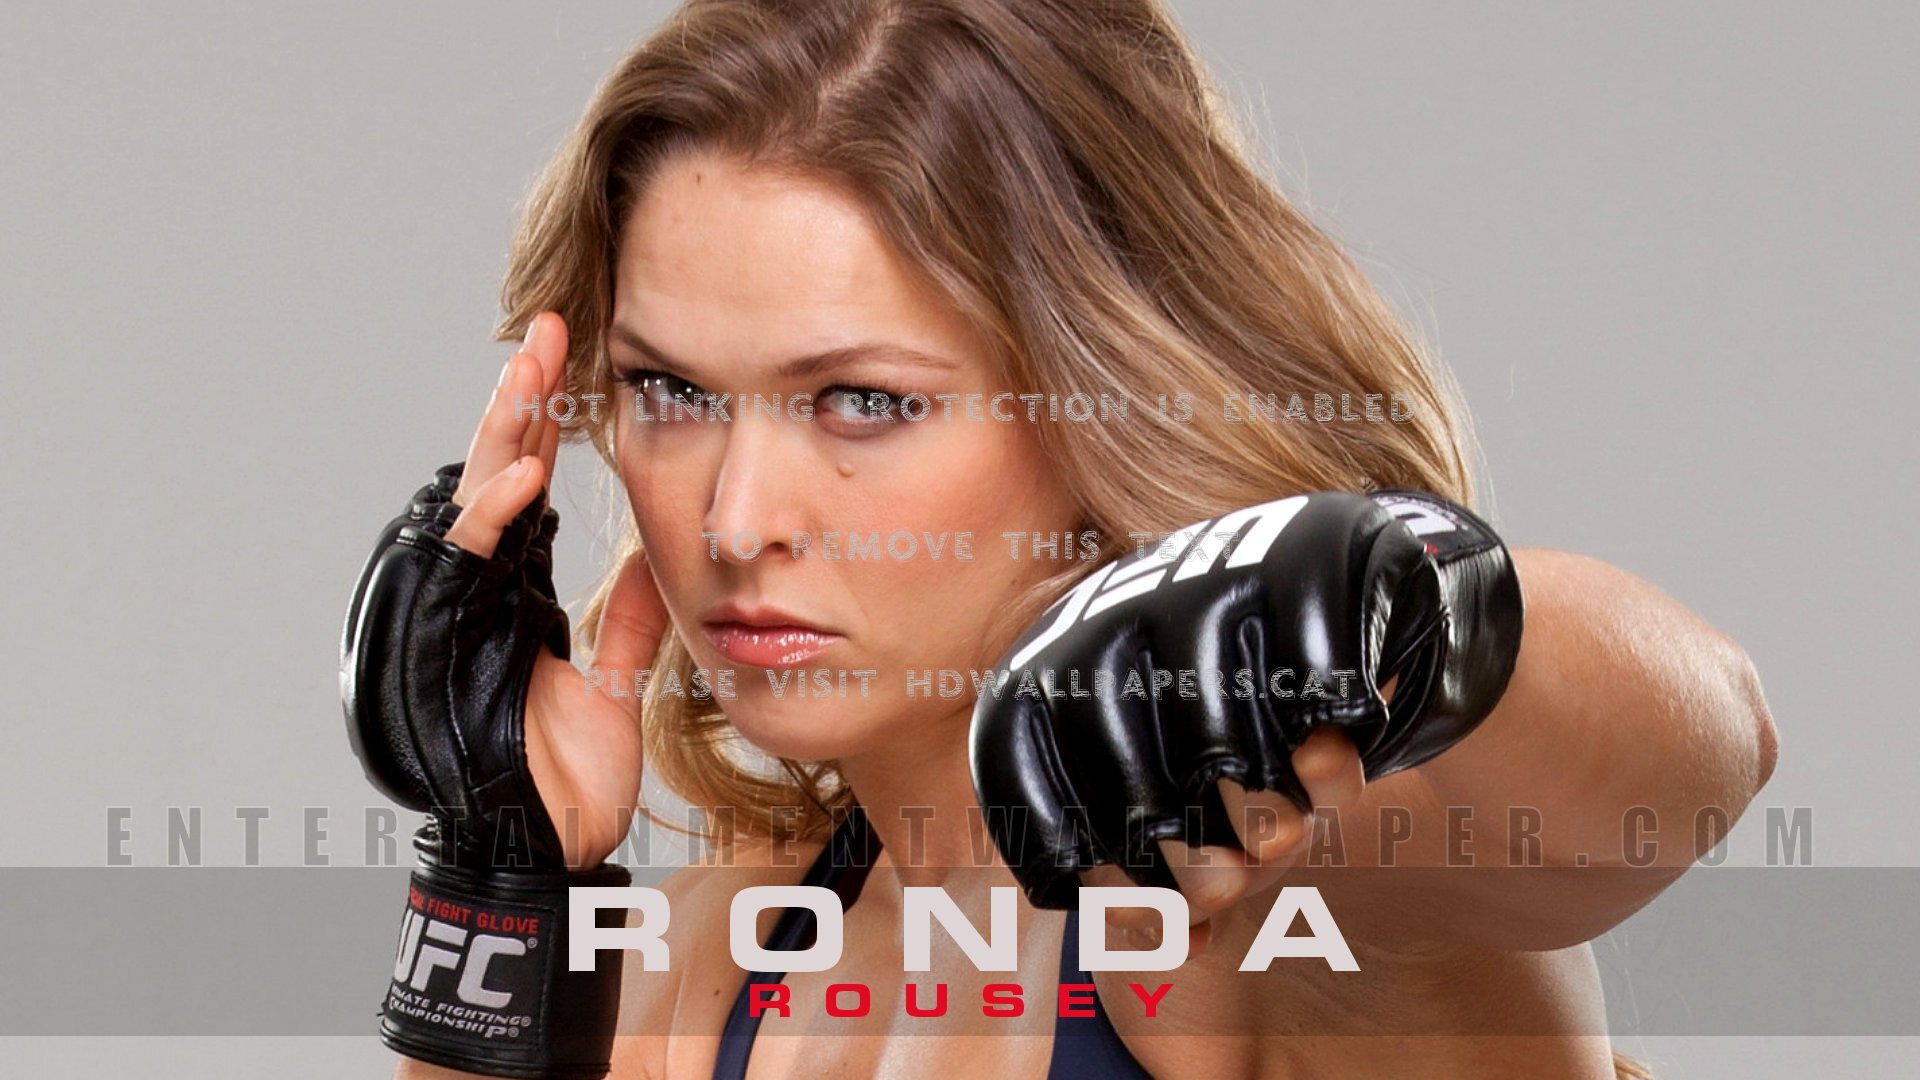 Ronda Rousey Mma Ultimate Fighter Sports - Hd Wallpaper Ronda Rousey - HD Wallpaper 